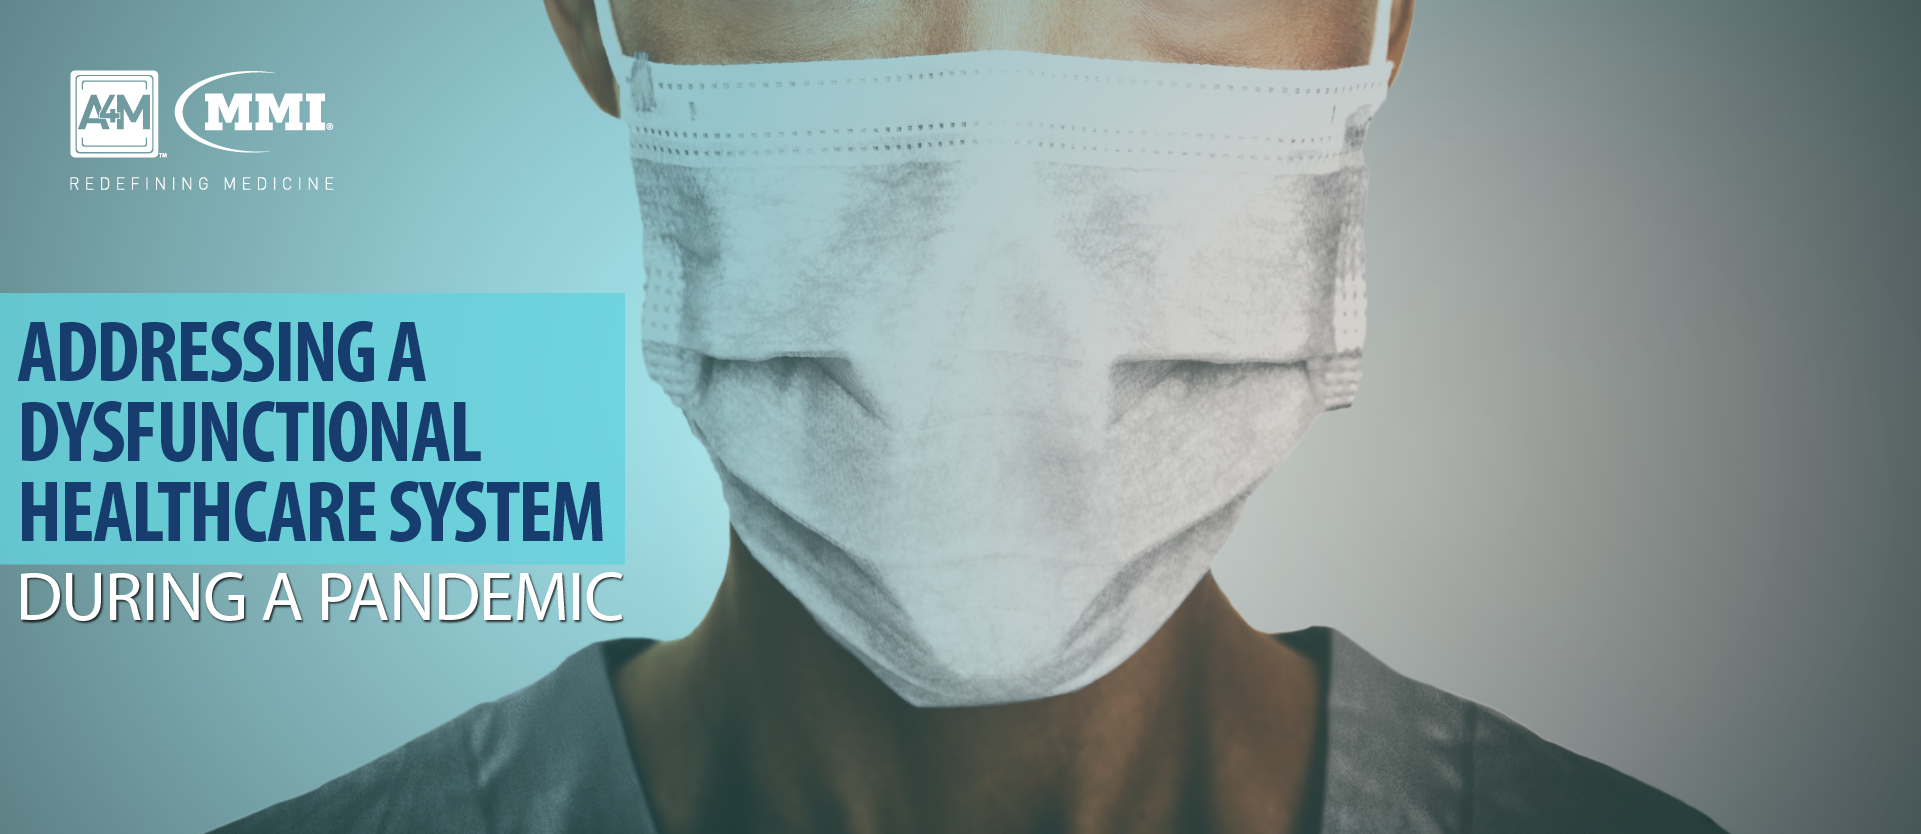 Addressing A Dysfunctional Healthcare System During A Pandemic • A4m Blog 7177